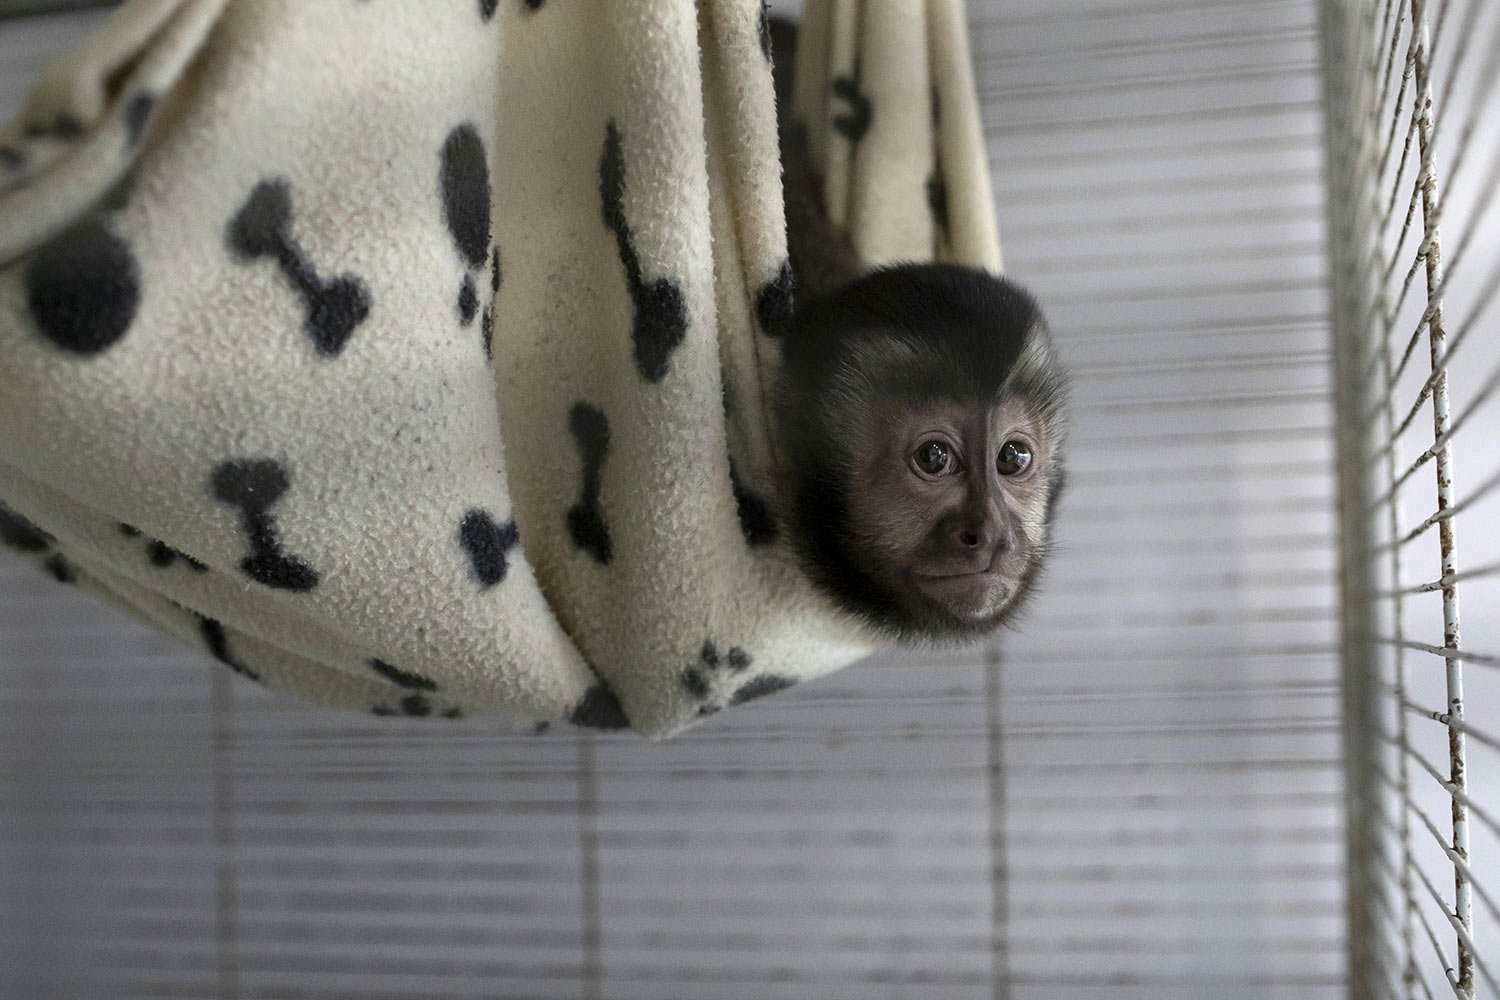  A young capuchin monkey named Marcelinho, whose both arms were amputated due to an electrical discharge on high voltage wires in the city, hangs in a blanket inside a cage at the Free Life Institute, NGO, in Rio de Janeiro, Brazil, March 10, 2023. T